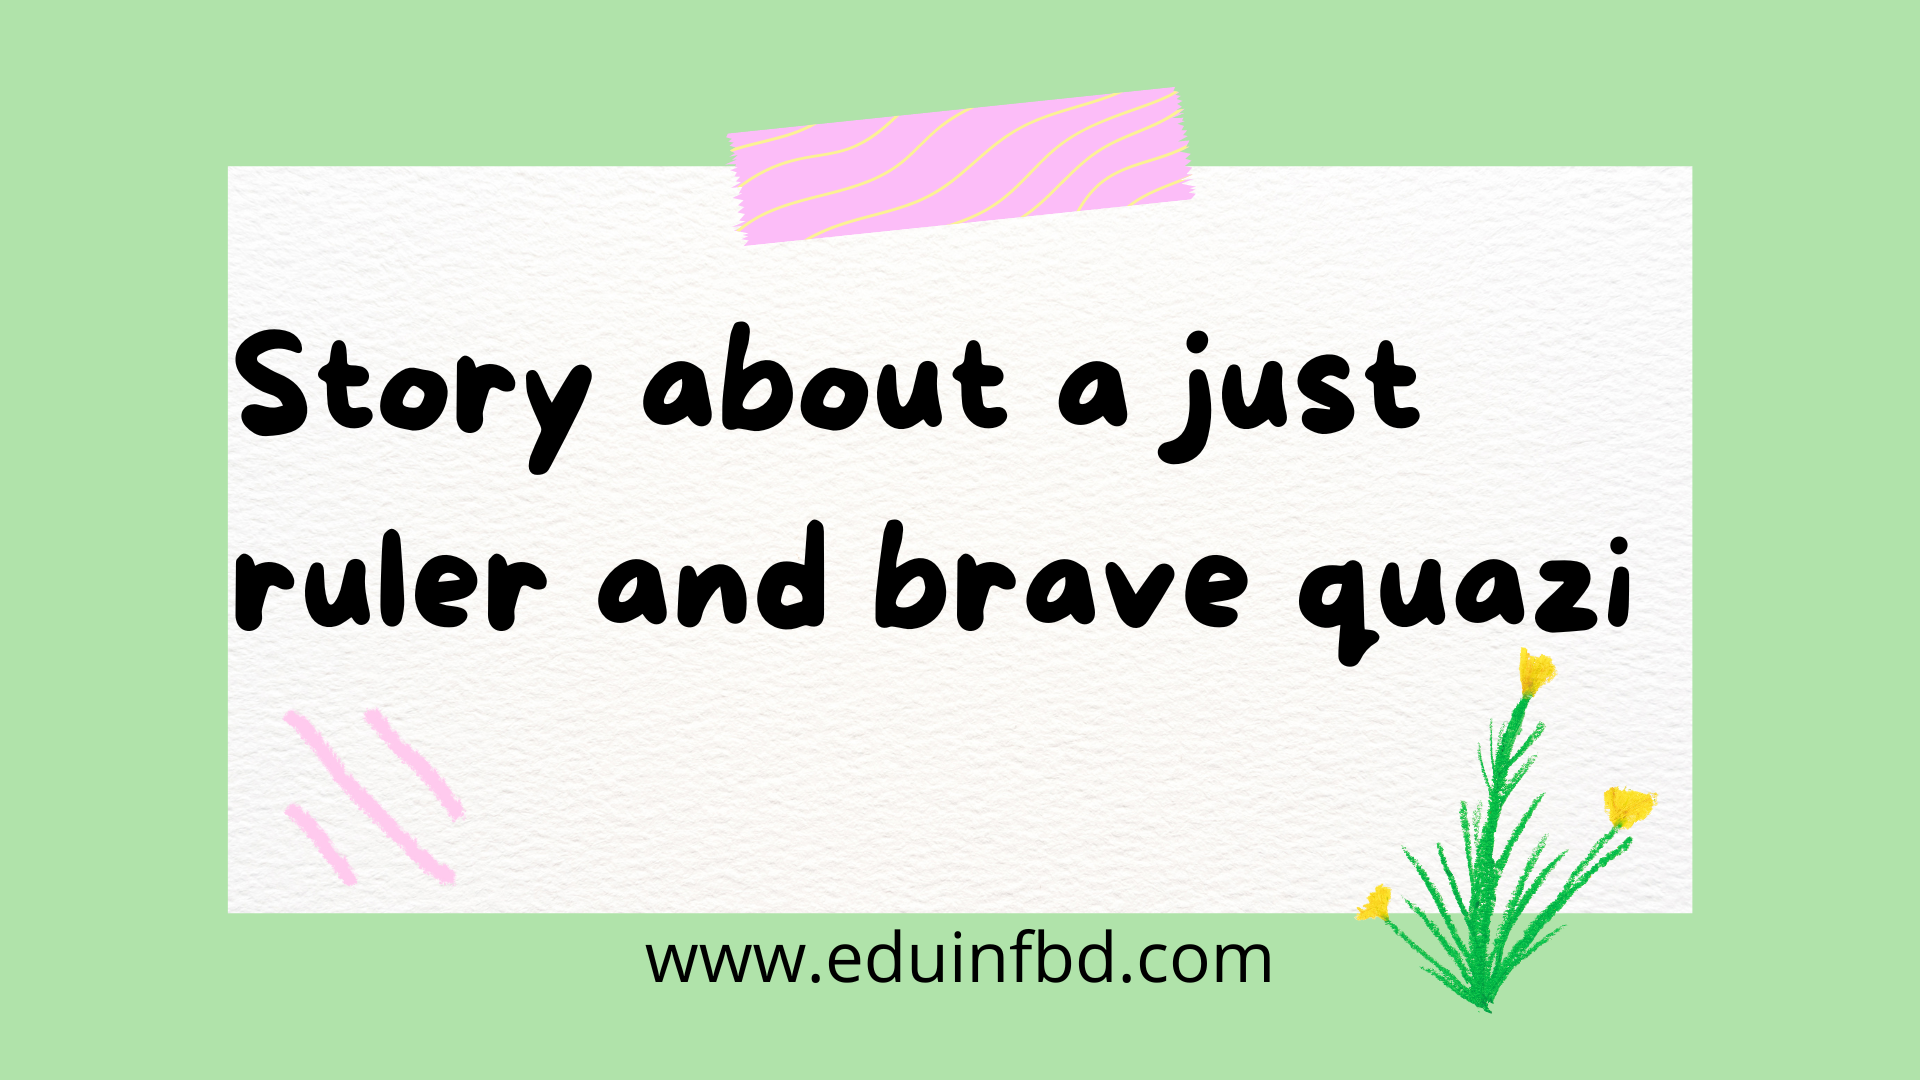 Story about a just ruler and brave quazi